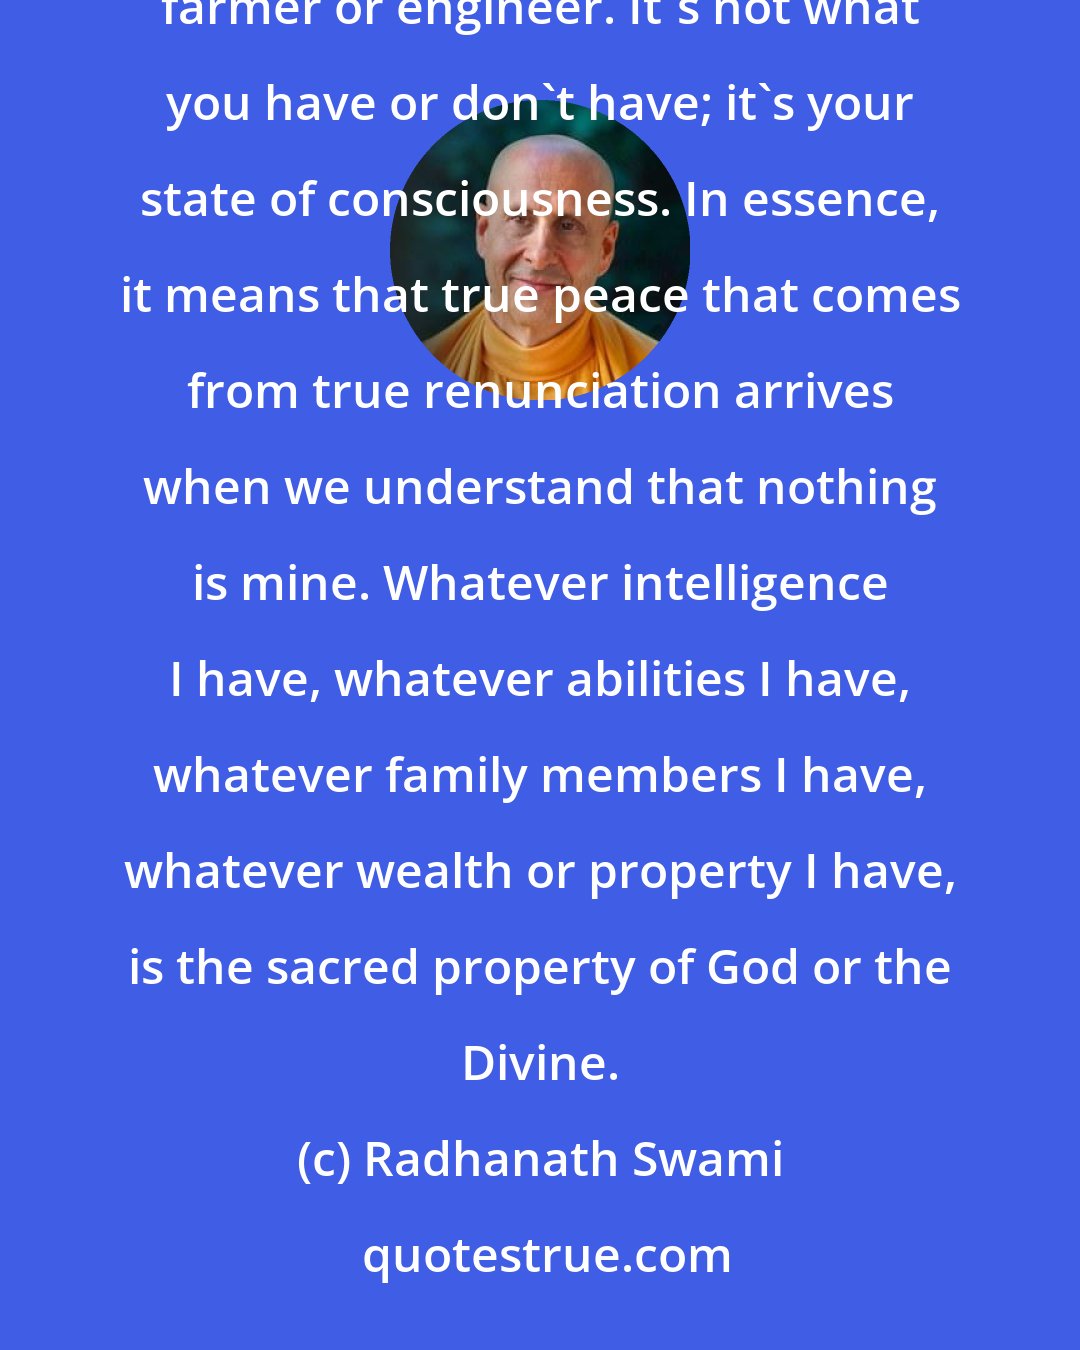 Radhanath Swami: True renunciation can be attained by anyone - whether a millionaire, parent, student, politician, farmer or engineer. It's not what you have or don't have; it's your state of consciousness. In essence, it means that true peace that comes from true renunciation arrives when we understand that nothing is mine. Whatever intelligence I have, whatever abilities I have, whatever family members I have, whatever wealth or property I have, is the sacred property of God or the Divine.